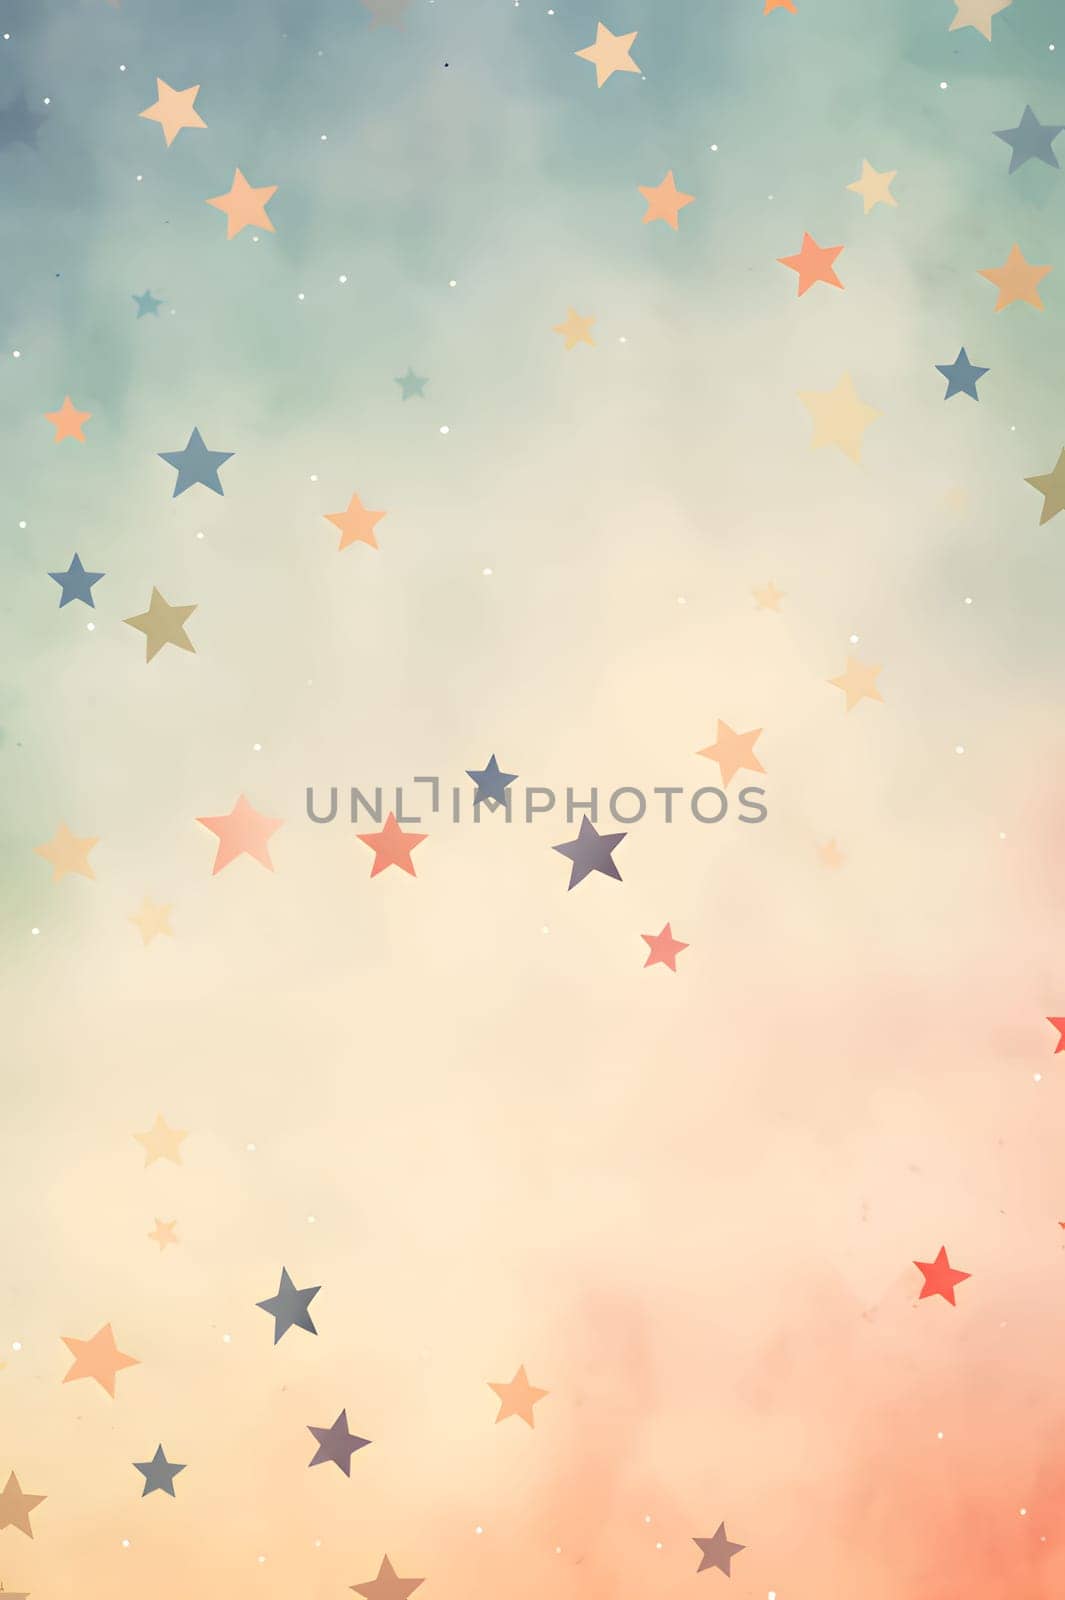 Colorful stars as abstract background, wallpaper, banner, texture design with pattern - vector. Light colors. by ThemesS